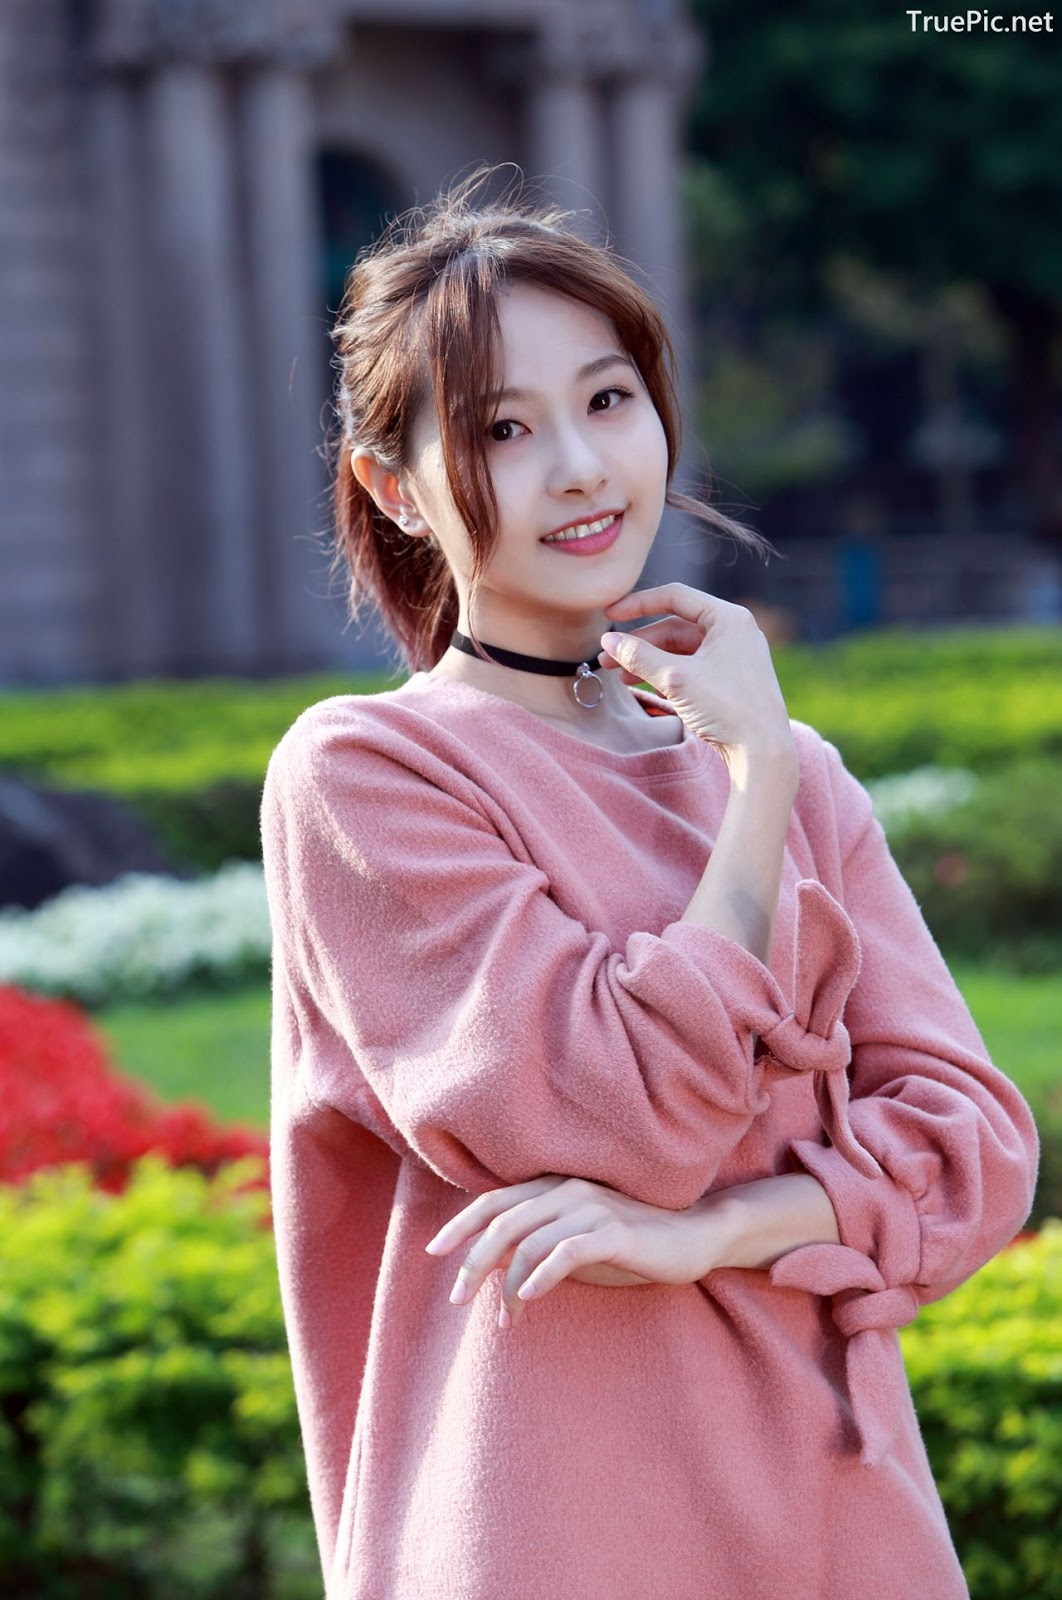 Image-Taiwanese-Model-郭思敏-Pure-And-Gorgeous-Girl-In-Pink-Sweater-Dress-TruePic.net- Picture-13